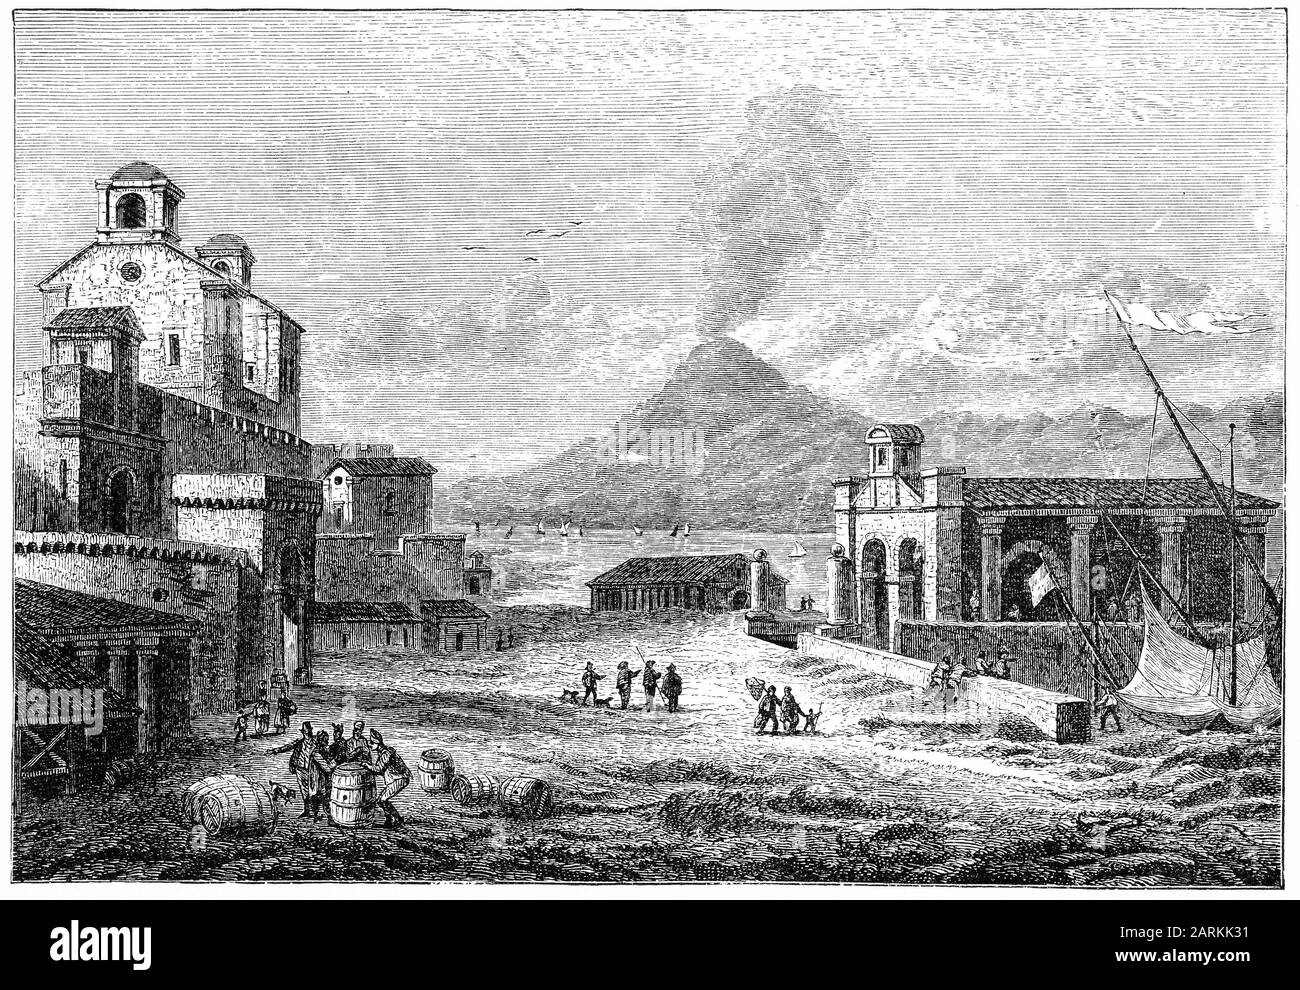 Engraving of the ancient city of Reggio, as it stood in the 1800s. The city was largely destroyed by earthquake in 1908. this view is looking south-west, with the port on the right and Mount Etna in the distance on the opposite side of the Strait of Messina. Stock Photo